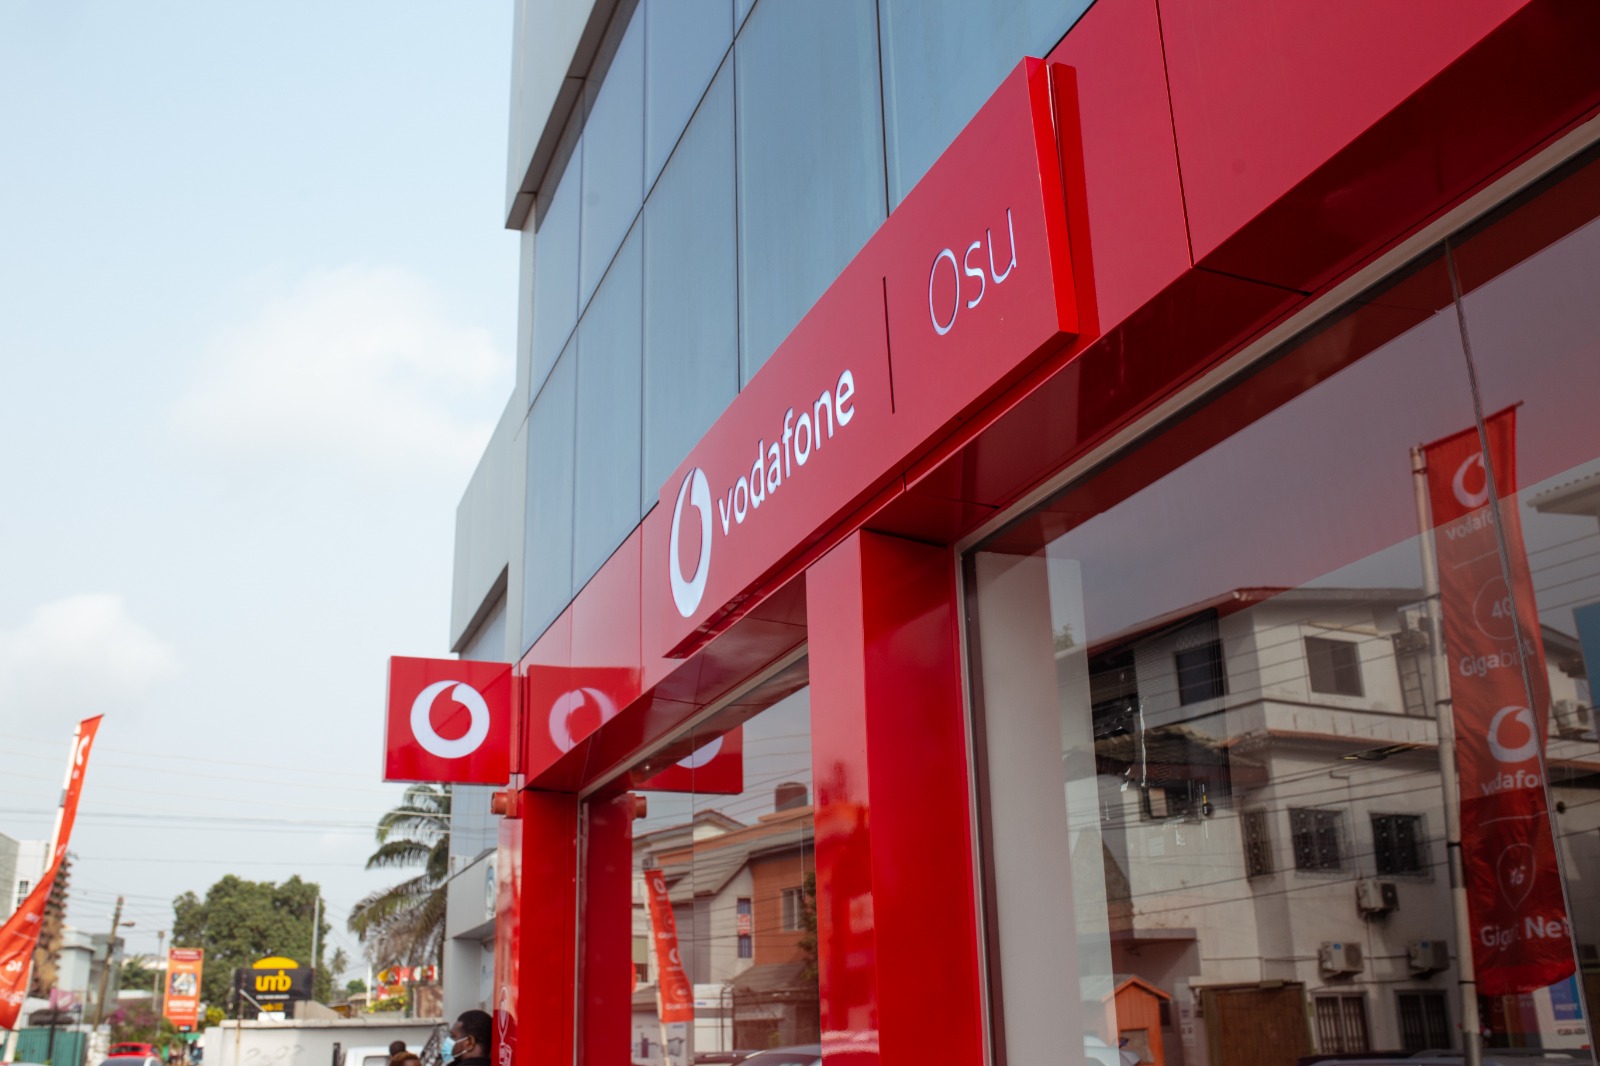 NCA confirms approval of transfer of majority share from Vodafone Group Plc to Telecel Group